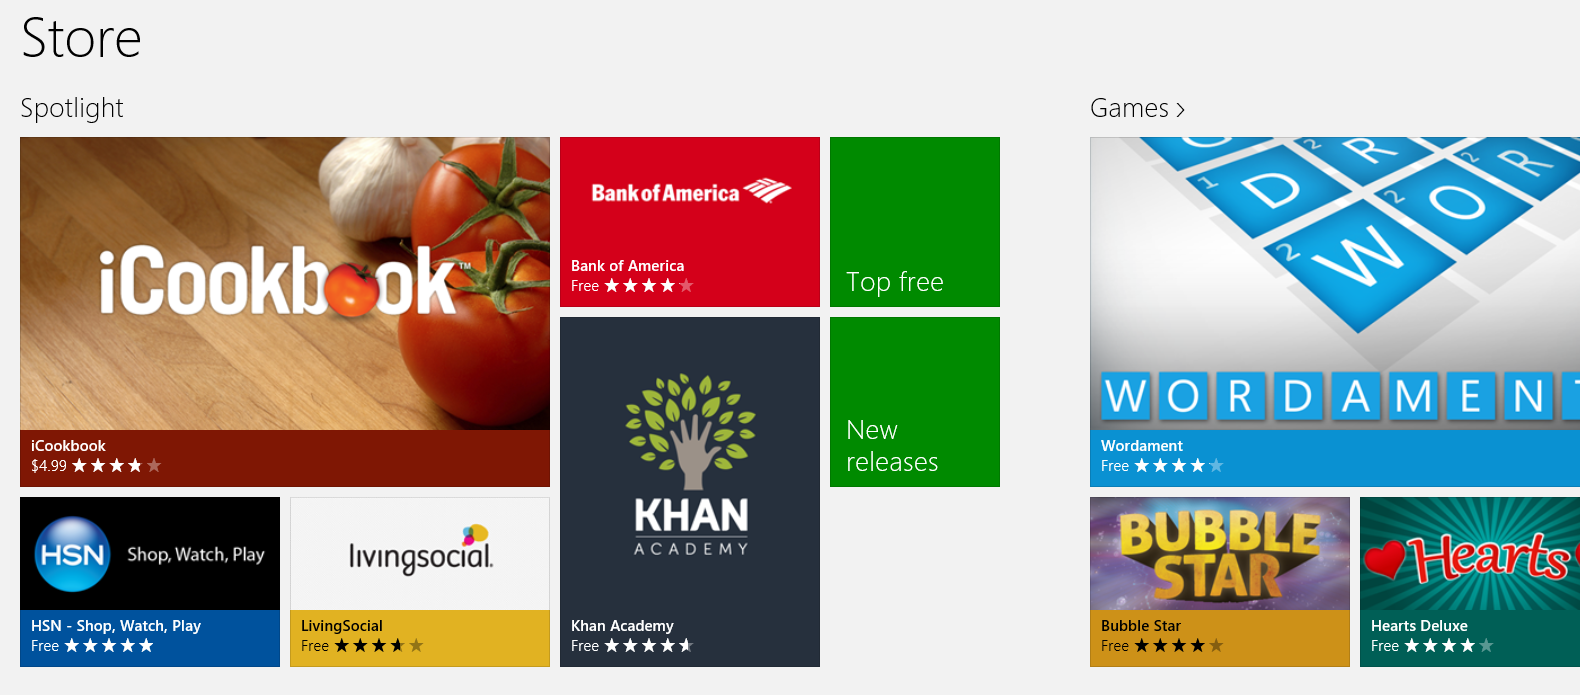 The-Number-of-Windows-8-Apps-Has-Doubled-Since-Launch-Microsoft-2.png